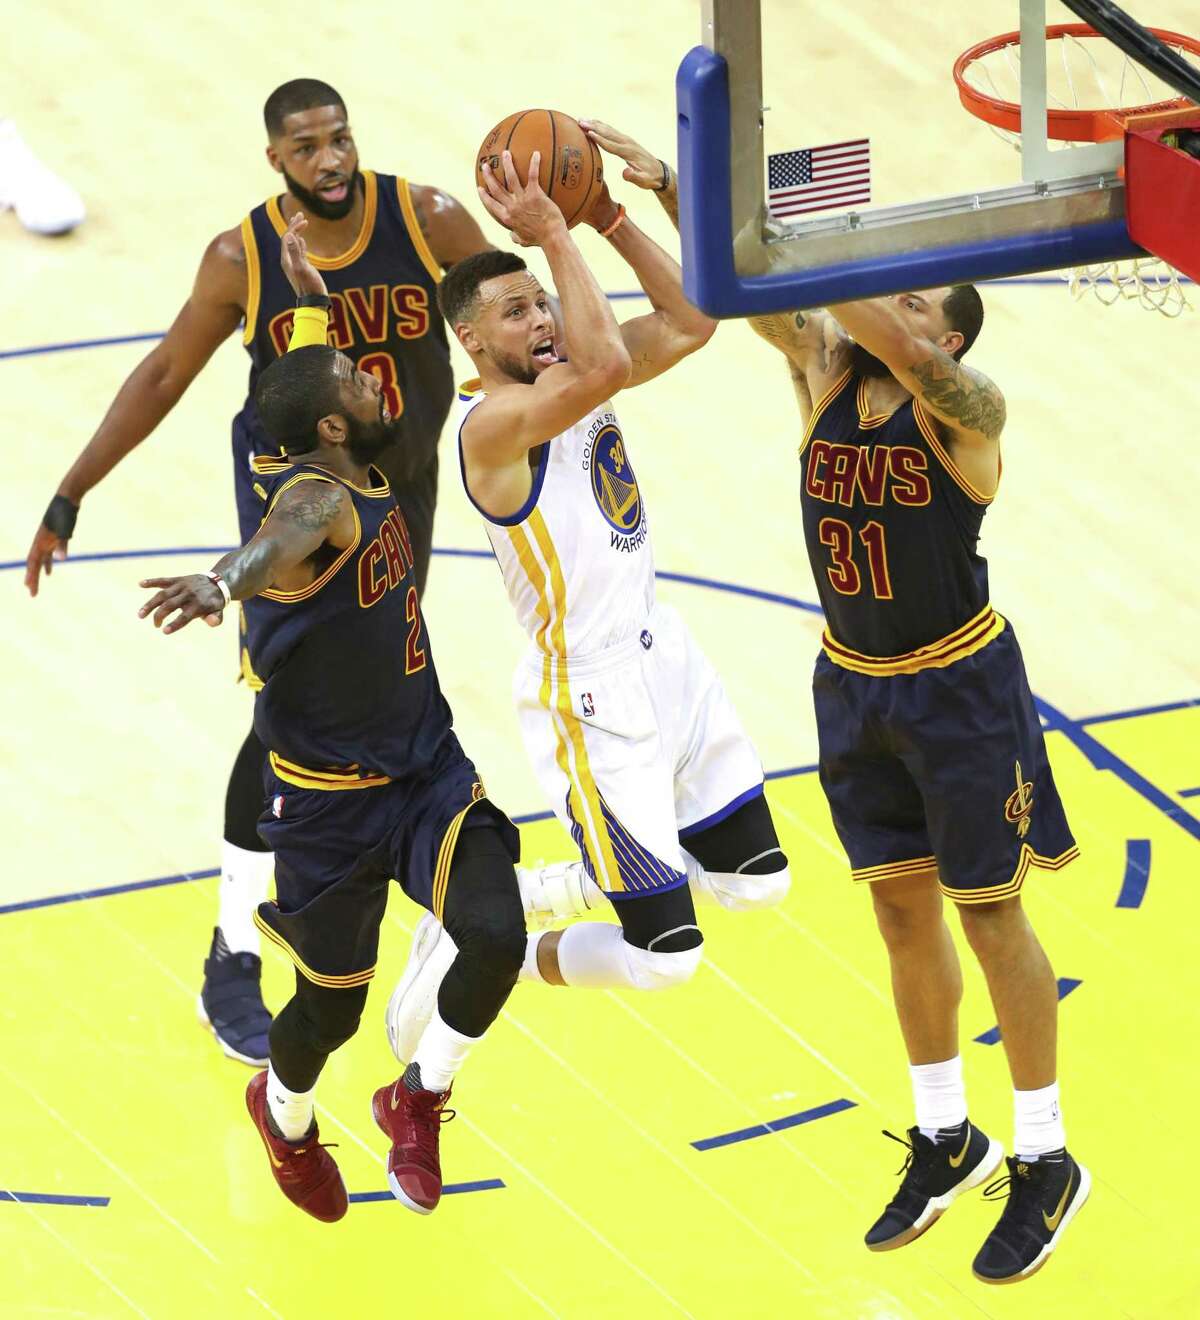 Golden State Warriors' Stephen Curry drives between Cleveland Cavaliers' Kyrie Irving and Deron Williams in 1st quarter during Game 1 of the NBA Finals at Oracle Arena in Oakland, Calif., on Thursday, June 1, 2017.